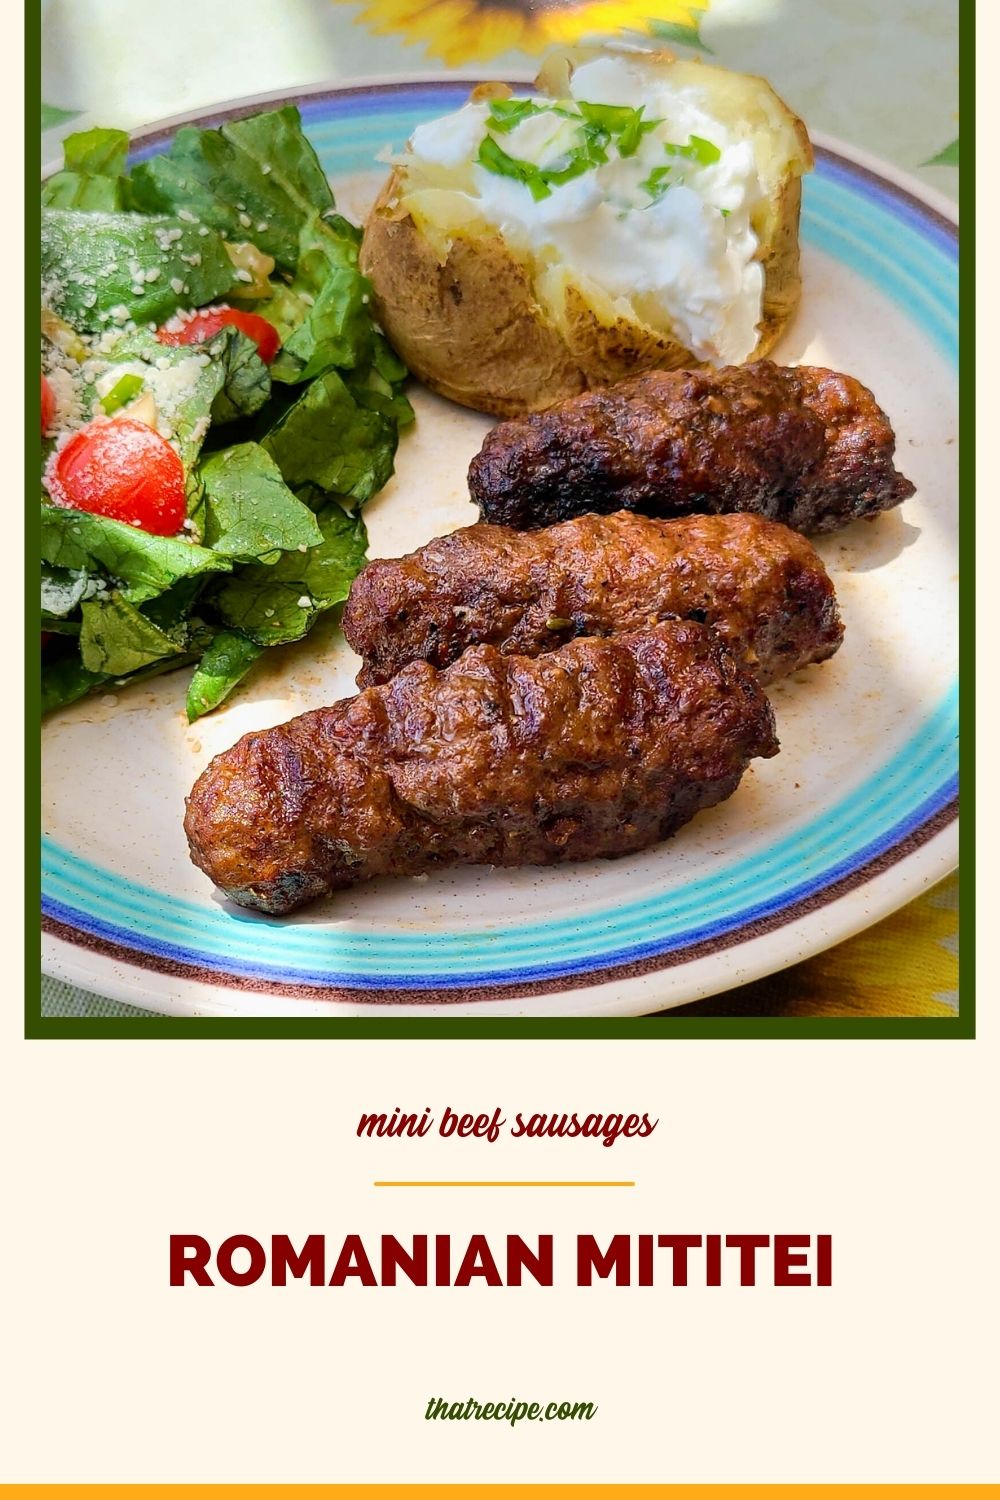 grilled beef sausages on a plate with text Romanian Mititei